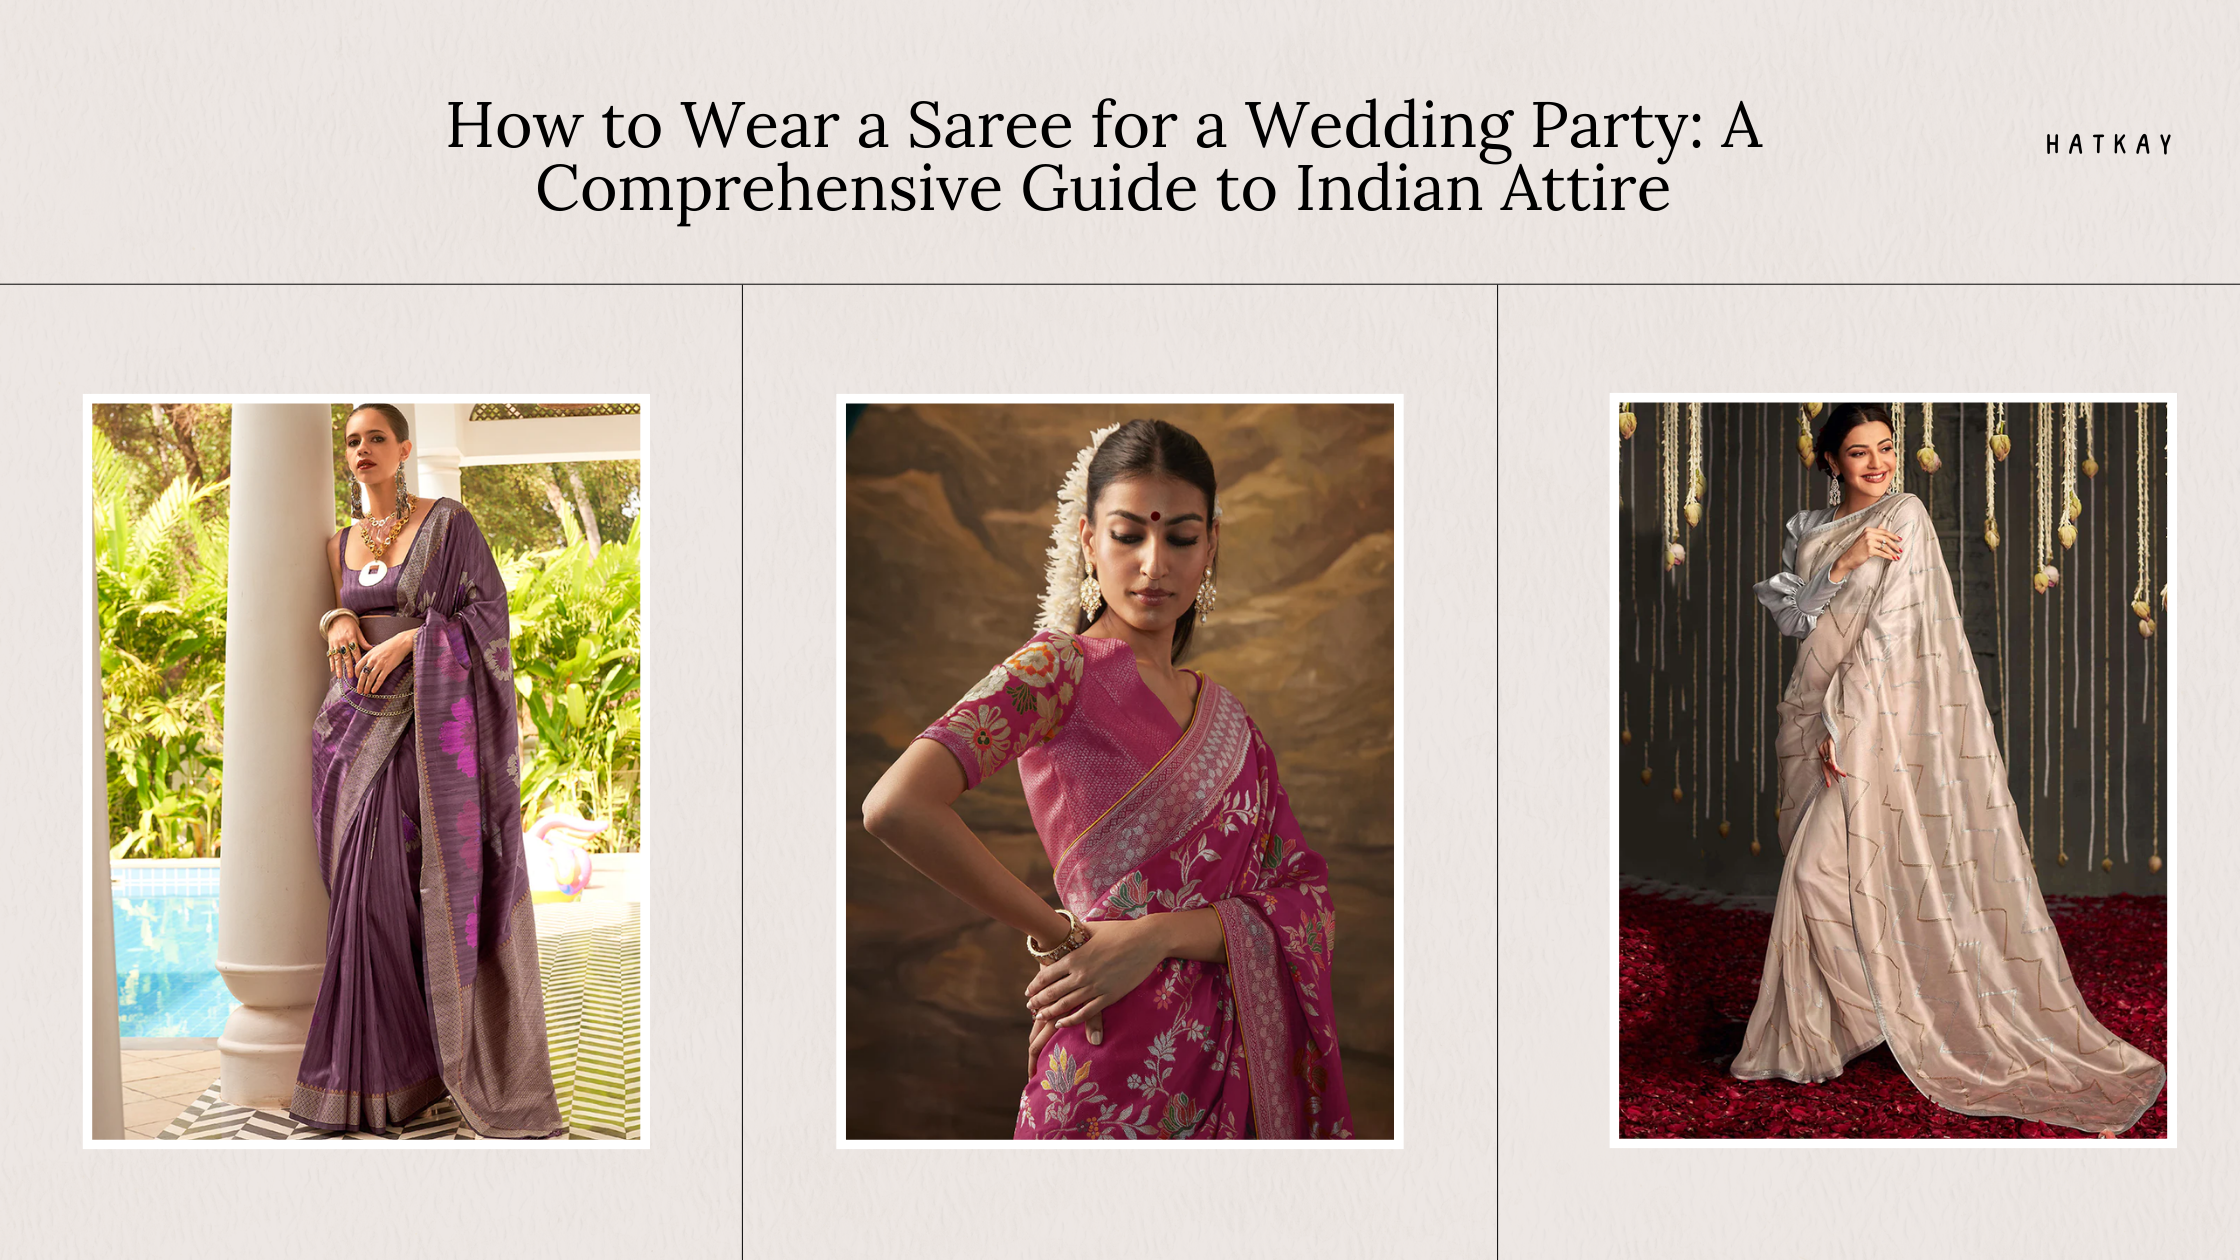 How to Wear a Saree for a Wedding Party: A Comprehensive Guide to Indian Attire